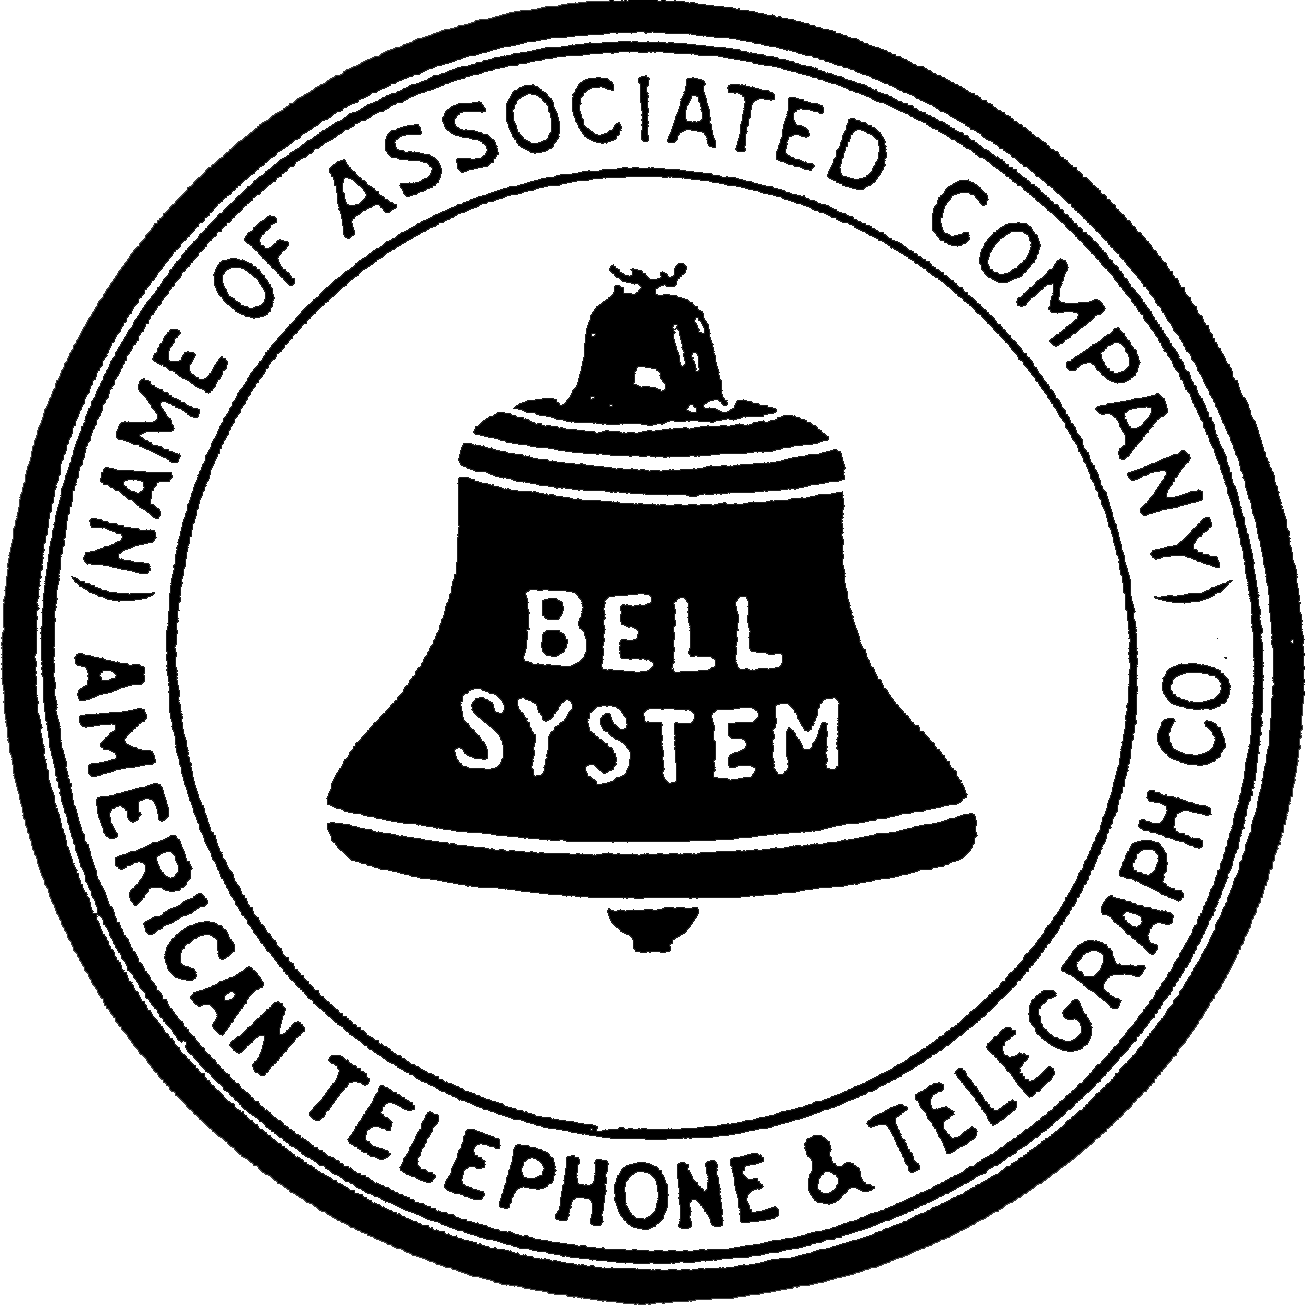 Black Bell Logo - File:Bell System hires 1921 logo.PNG - Wikimedia Commons